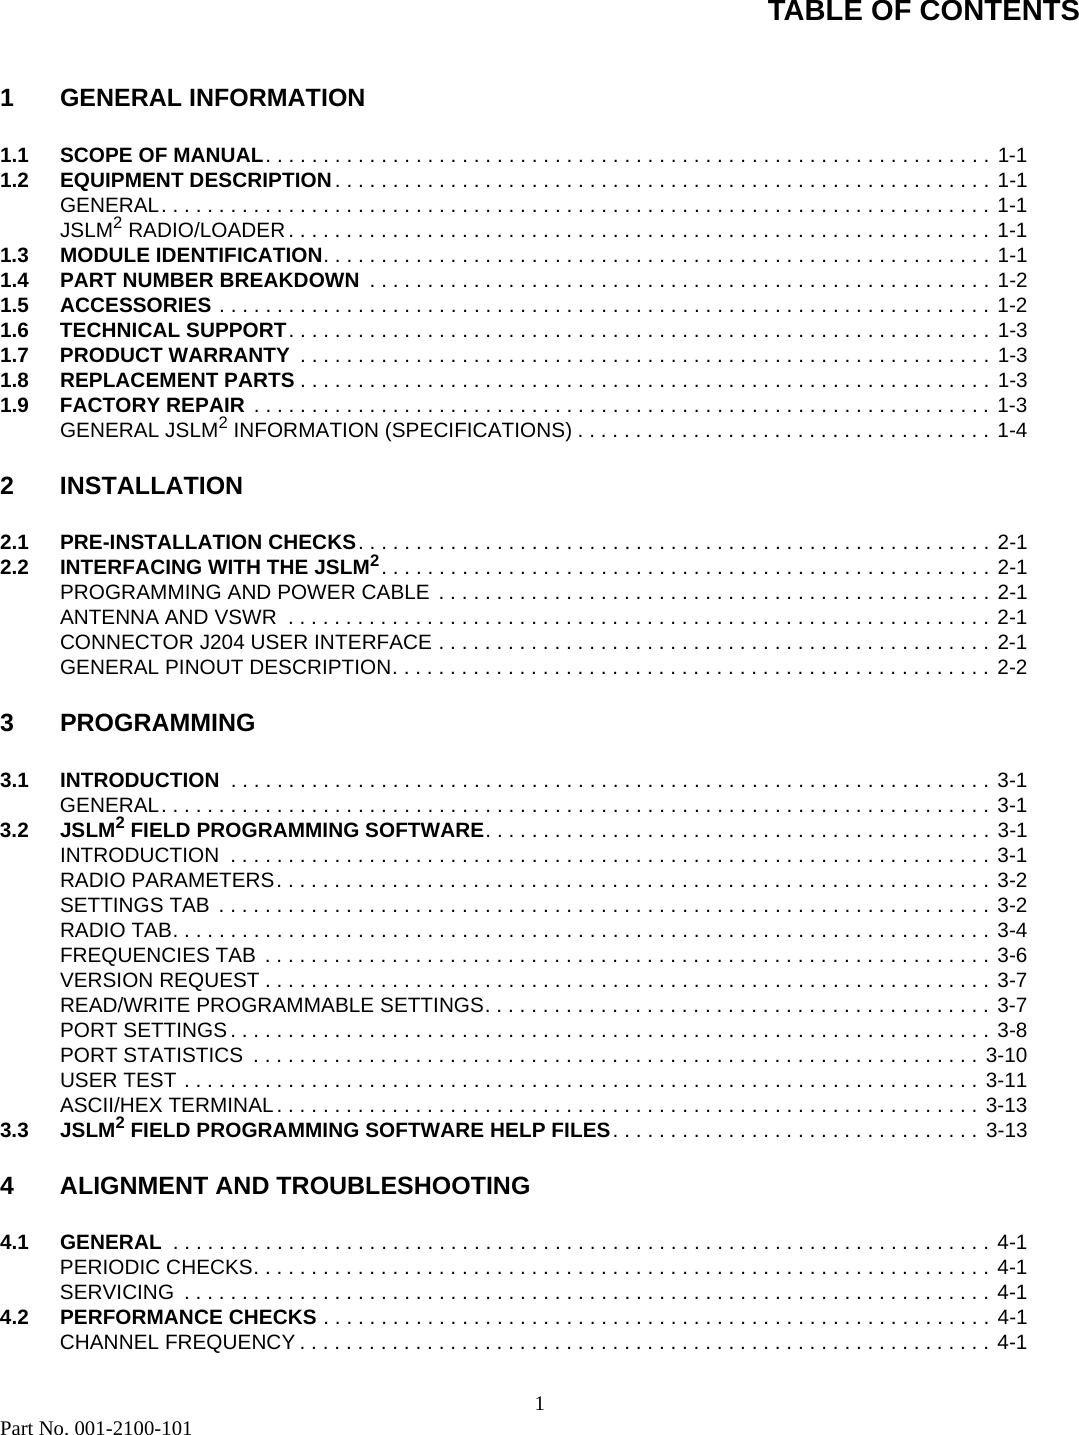 TABLE OF CONTENTS1Part No. 001-2100-1011 GENERAL INFORMATION1.1 SCOPE OF MANUAL. . . . . . . . . . . . . . . . . . . . . . . . . . . . . . . . . . . . . . . . . . . . . . . . . . . . . . . . . . . . . . . 1-11.2 EQUIPMENT DESCRIPTION. . . . . . . . . . . . . . . . . . . . . . . . . . . . . . . . . . . . . . . . . . . . . . . . . . . . . . . . . 1-1GENERAL. . . . . . . . . . . . . . . . . . . . . . . . . . . . . . . . . . . . . . . . . . . . . . . . . . . . . . . . . . . . . . . . . . . . . . . . 1-1JSLM2 RADIO/LOADER . . . . . . . . . . . . . . . . . . . . . . . . . . . . . . . . . . . . . . . . . . . . . . . . . . . . . . . . . . . . . 1-11.3 MODULE IDENTIFICATION. . . . . . . . . . . . . . . . . . . . . . . . . . . . . . . . . . . . . . . . . . . . . . . . . . . . . . . . . . 1-11.4 PART NUMBER BREAKDOWN  . . . . . . . . . . . . . . . . . . . . . . . . . . . . . . . . . . . . . . . . . . . . . . . . . . . . . . 1-21.5 ACCESSORIES . . . . . . . . . . . . . . . . . . . . . . . . . . . . . . . . . . . . . . . . . . . . . . . . . . . . . . . . . . . . . . . . . . . 1-21.6 TECHNICAL SUPPORT. . . . . . . . . . . . . . . . . . . . . . . . . . . . . . . . . . . . . . . . . . . . . . . . . . . . . . . . . . . . . 1-31.7 PRODUCT WARRANTY  . . . . . . . . . . . . . . . . . . . . . . . . . . . . . . . . . . . . . . . . . . . . . . . . . . . . . . . . . . . . 1-31.8 REPLACEMENT PARTS . . . . . . . . . . . . . . . . . . . . . . . . . . . . . . . . . . . . . . . . . . . . . . . . . . . . . . . . . . . . 1-31.9 FACTORY REPAIR . . . . . . . . . . . . . . . . . . . . . . . . . . . . . . . . . . . . . . . . . . . . . . . . . . . . . . . . . . . . . . . . 1-3GENERAL JSLM2 INFORMATION (SPECIFICATIONS) . . . . . . . . . . . . . . . . . . . . . . . . . . . . . . . . . . . . 1-42INSTALLATION2.1 PRE-INSTALLATION CHECKS. . . . . . . . . . . . . . . . . . . . . . . . . . . . . . . . . . . . . . . . . . . . . . . . . . . . . . . 2-12.2 INTERFACING WITH THE JSLM2. . . . . . . . . . . . . . . . . . . . . . . . . . . . . . . . . . . . . . . . . . . . . . . . . . . . . 2-1PROGRAMMING AND POWER CABLE  . . . . . . . . . . . . . . . . . . . . . . . . . . . . . . . . . . . . . . . . . . . . . . . . 2-1ANTENNA AND VSWR  . . . . . . . . . . . . . . . . . . . . . . . . . . . . . . . . . . . . . . . . . . . . . . . . . . . . . . . . . . . . . 2-1CONNECTOR J204 USER INTERFACE . . . . . . . . . . . . . . . . . . . . . . . . . . . . . . . . . . . . . . . . . . . . . . . . 2-1GENERAL PINOUT DESCRIPTION. . . . . . . . . . . . . . . . . . . . . . . . . . . . . . . . . . . . . . . . . . . . . . . . . . . . 2-23 PROGRAMMING3.1 INTRODUCTION  . . . . . . . . . . . . . . . . . . . . . . . . . . . . . . . . . . . . . . . . . . . . . . . . . . . . . . . . . . . . . . . . . . 3-1GENERAL. . . . . . . . . . . . . . . . . . . . . . . . . . . . . . . . . . . . . . . . . . . . . . . . . . . . . . . . . . . . . . . . . . . . . . . . 3-13.2 JSLM2 FIELD PROGRAMMING SOFTWARE. . . . . . . . . . . . . . . . . . . . . . . . . . . . . . . . . . . . . . . . . . . . 3-1INTRODUCTION  . . . . . . . . . . . . . . . . . . . . . . . . . . . . . . . . . . . . . . . . . . . . . . . . . . . . . . . . . . . . . . . . . . 3-1RADIO PARAMETERS. . . . . . . . . . . . . . . . . . . . . . . . . . . . . . . . . . . . . . . . . . . . . . . . . . . . . . . . . . . . . . 3-2SETTINGS TAB  . . . . . . . . . . . . . . . . . . . . . . . . . . . . . . . . . . . . . . . . . . . . . . . . . . . . . . . . . . . . . . . . . . . 3-2RADIO TAB. . . . . . . . . . . . . . . . . . . . . . . . . . . . . . . . . . . . . . . . . . . . . . . . . . . . . . . . . . . . . . . . . . . . . . . 3-4FREQUENCIES TAB  . . . . . . . . . . . . . . . . . . . . . . . . . . . . . . . . . . . . . . . . . . . . . . . . . . . . . . . . . . . . . . . 3-6VERSION REQUEST . . . . . . . . . . . . . . . . . . . . . . . . . . . . . . . . . . . . . . . . . . . . . . . . . . . . . . . . . . . . . . . 3-7READ/WRITE PROGRAMMABLE SETTINGS. . . . . . . . . . . . . . . . . . . . . . . . . . . . . . . . . . . . . . . . . . . . 3-7PORT SETTINGS . . . . . . . . . . . . . . . . . . . . . . . . . . . . . . . . . . . . . . . . . . . . . . . . . . . . . . . . . . . . . . . . . . 3-8PORT STATISTICS  . . . . . . . . . . . . . . . . . . . . . . . . . . . . . . . . . . . . . . . . . . . . . . . . . . . . . . . . . . . . . . . 3-10USER TEST . . . . . . . . . . . . . . . . . . . . . . . . . . . . . . . . . . . . . . . . . . . . . . . . . . . . . . . . . . . . . . . . . . . . . 3-11ASCII/HEX TERMINAL. . . . . . . . . . . . . . . . . . . . . . . . . . . . . . . . . . . . . . . . . . . . . . . . . . . . . . . . . . . . . 3-133.3 JSLM2 FIELD PROGRAMMING SOFTWARE HELP FILES. . . . . . . . . . . . . . . . . . . . . . . . . . . . . . . . 3-134 ALIGNMENT AND TROUBLESHOOTING4.1 GENERAL  . . . . . . . . . . . . . . . . . . . . . . . . . . . . . . . . . . . . . . . . . . . . . . . . . . . . . . . . . . . . . . . . . . . . . . . 4-1PERIODIC CHECKS. . . . . . . . . . . . . . . . . . . . . . . . . . . . . . . . . . . . . . . . . . . . . . . . . . . . . . . . . . . . . . . . 4-1SERVICING  . . . . . . . . . . . . . . . . . . . . . . . . . . . . . . . . . . . . . . . . . . . . . . . . . . . . . . . . . . . . . . . . . . . . . . 4-14.2 PERFORMANCE CHECKS . . . . . . . . . . . . . . . . . . . . . . . . . . . . . . . . . . . . . . . . . . . . . . . . . . . . . . . . . . 4-1CHANNEL FREQUENCY . . . . . . . . . . . . . . . . . . . . . . . . . . . . . . . . . . . . . . . . . . . . . . . . . . . . . . . . . . . . 4-1